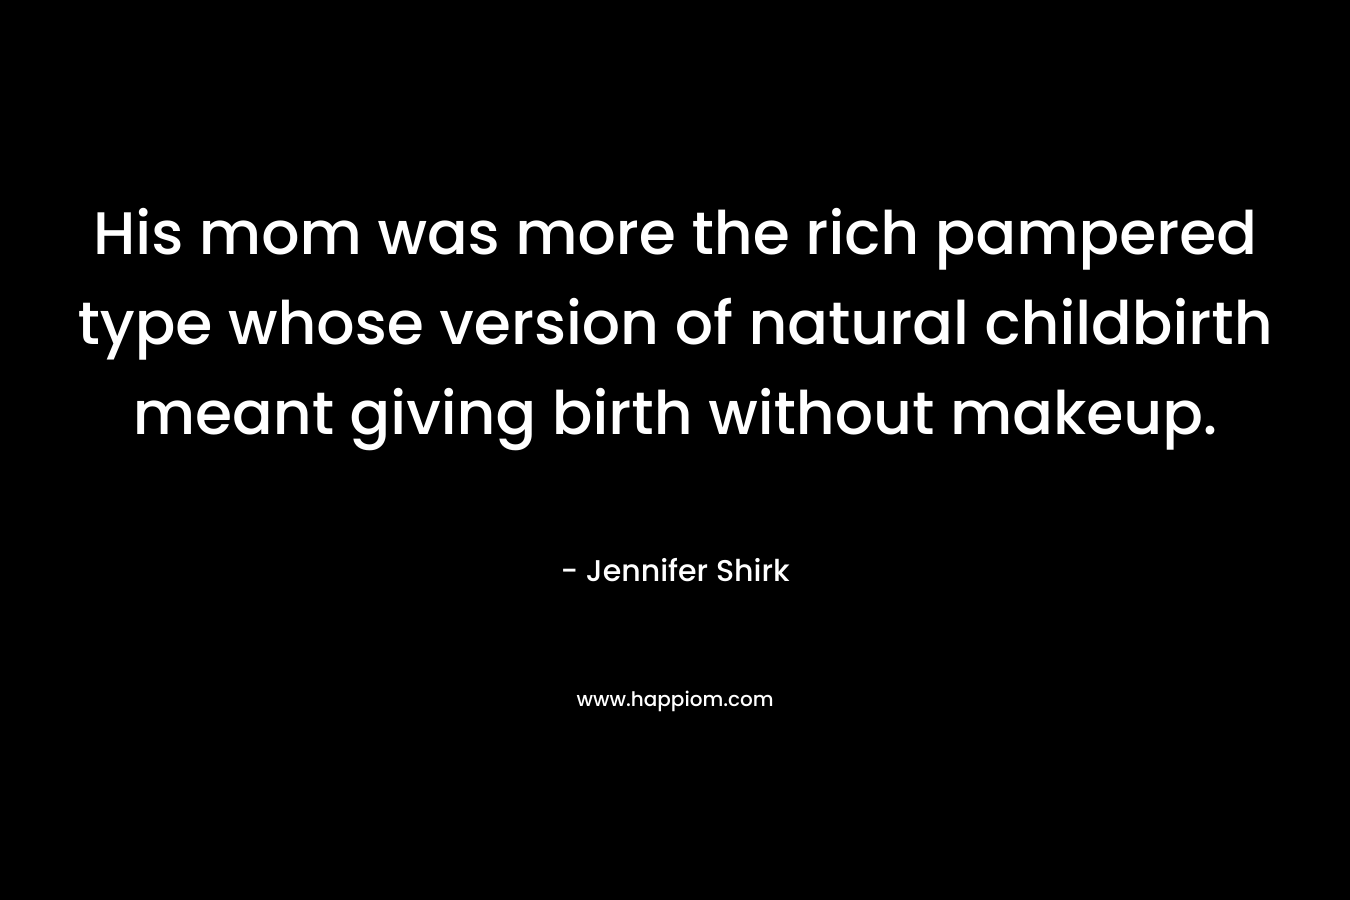 His mom was more the rich pampered type whose version of natural childbirth meant giving birth without makeup. – Jennifer Shirk